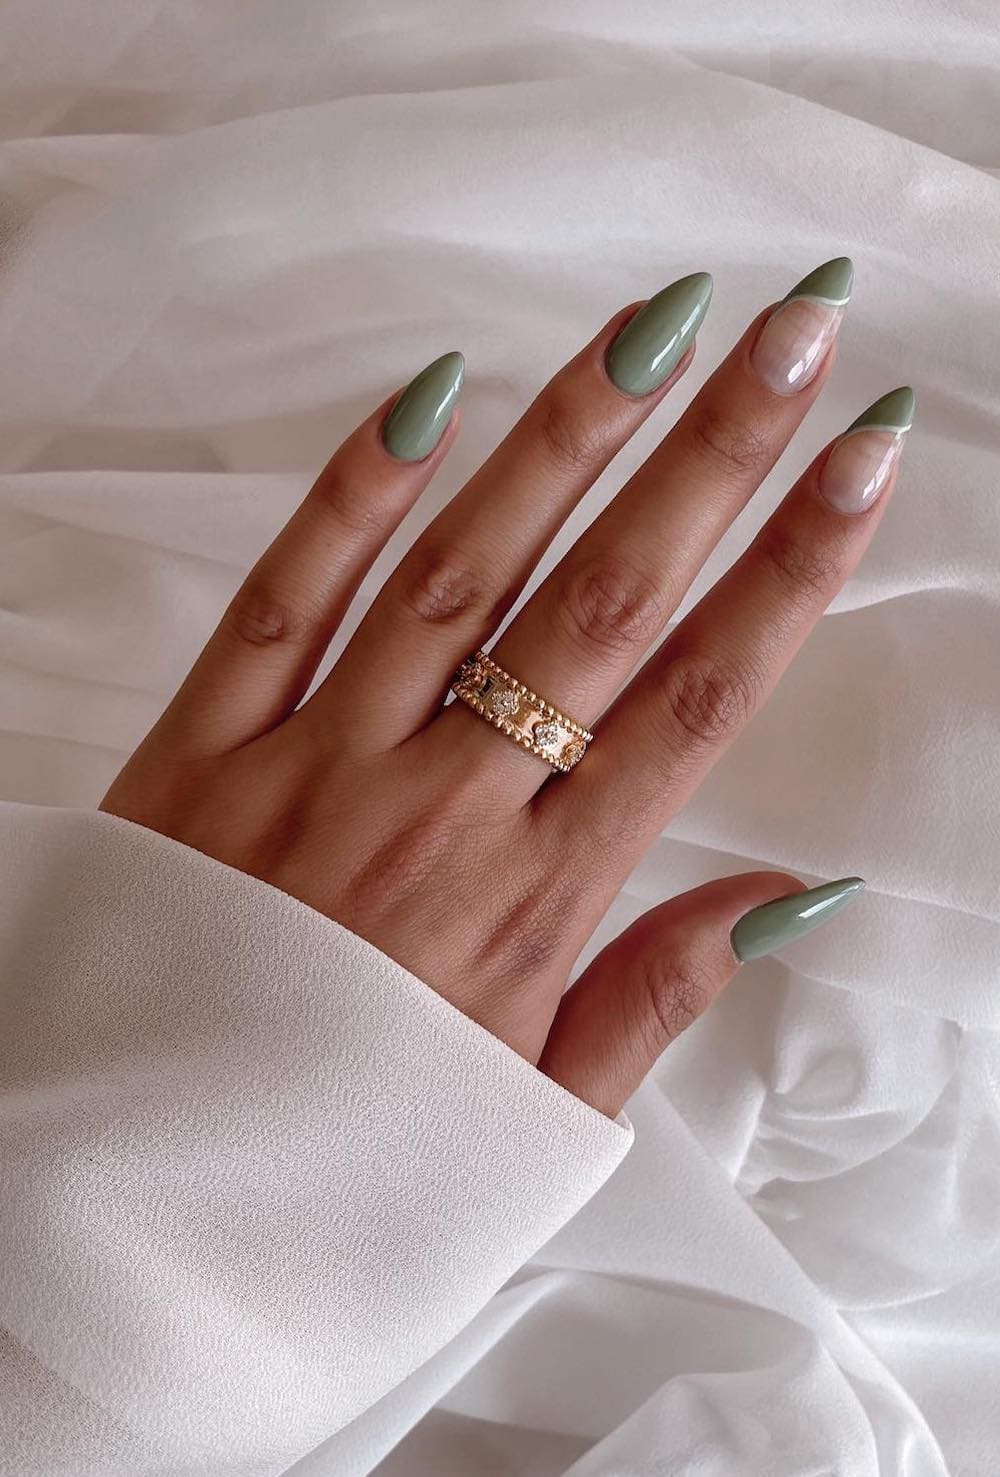 and image of a hand with sage green nail polish, natural nail spaces, and white line designs